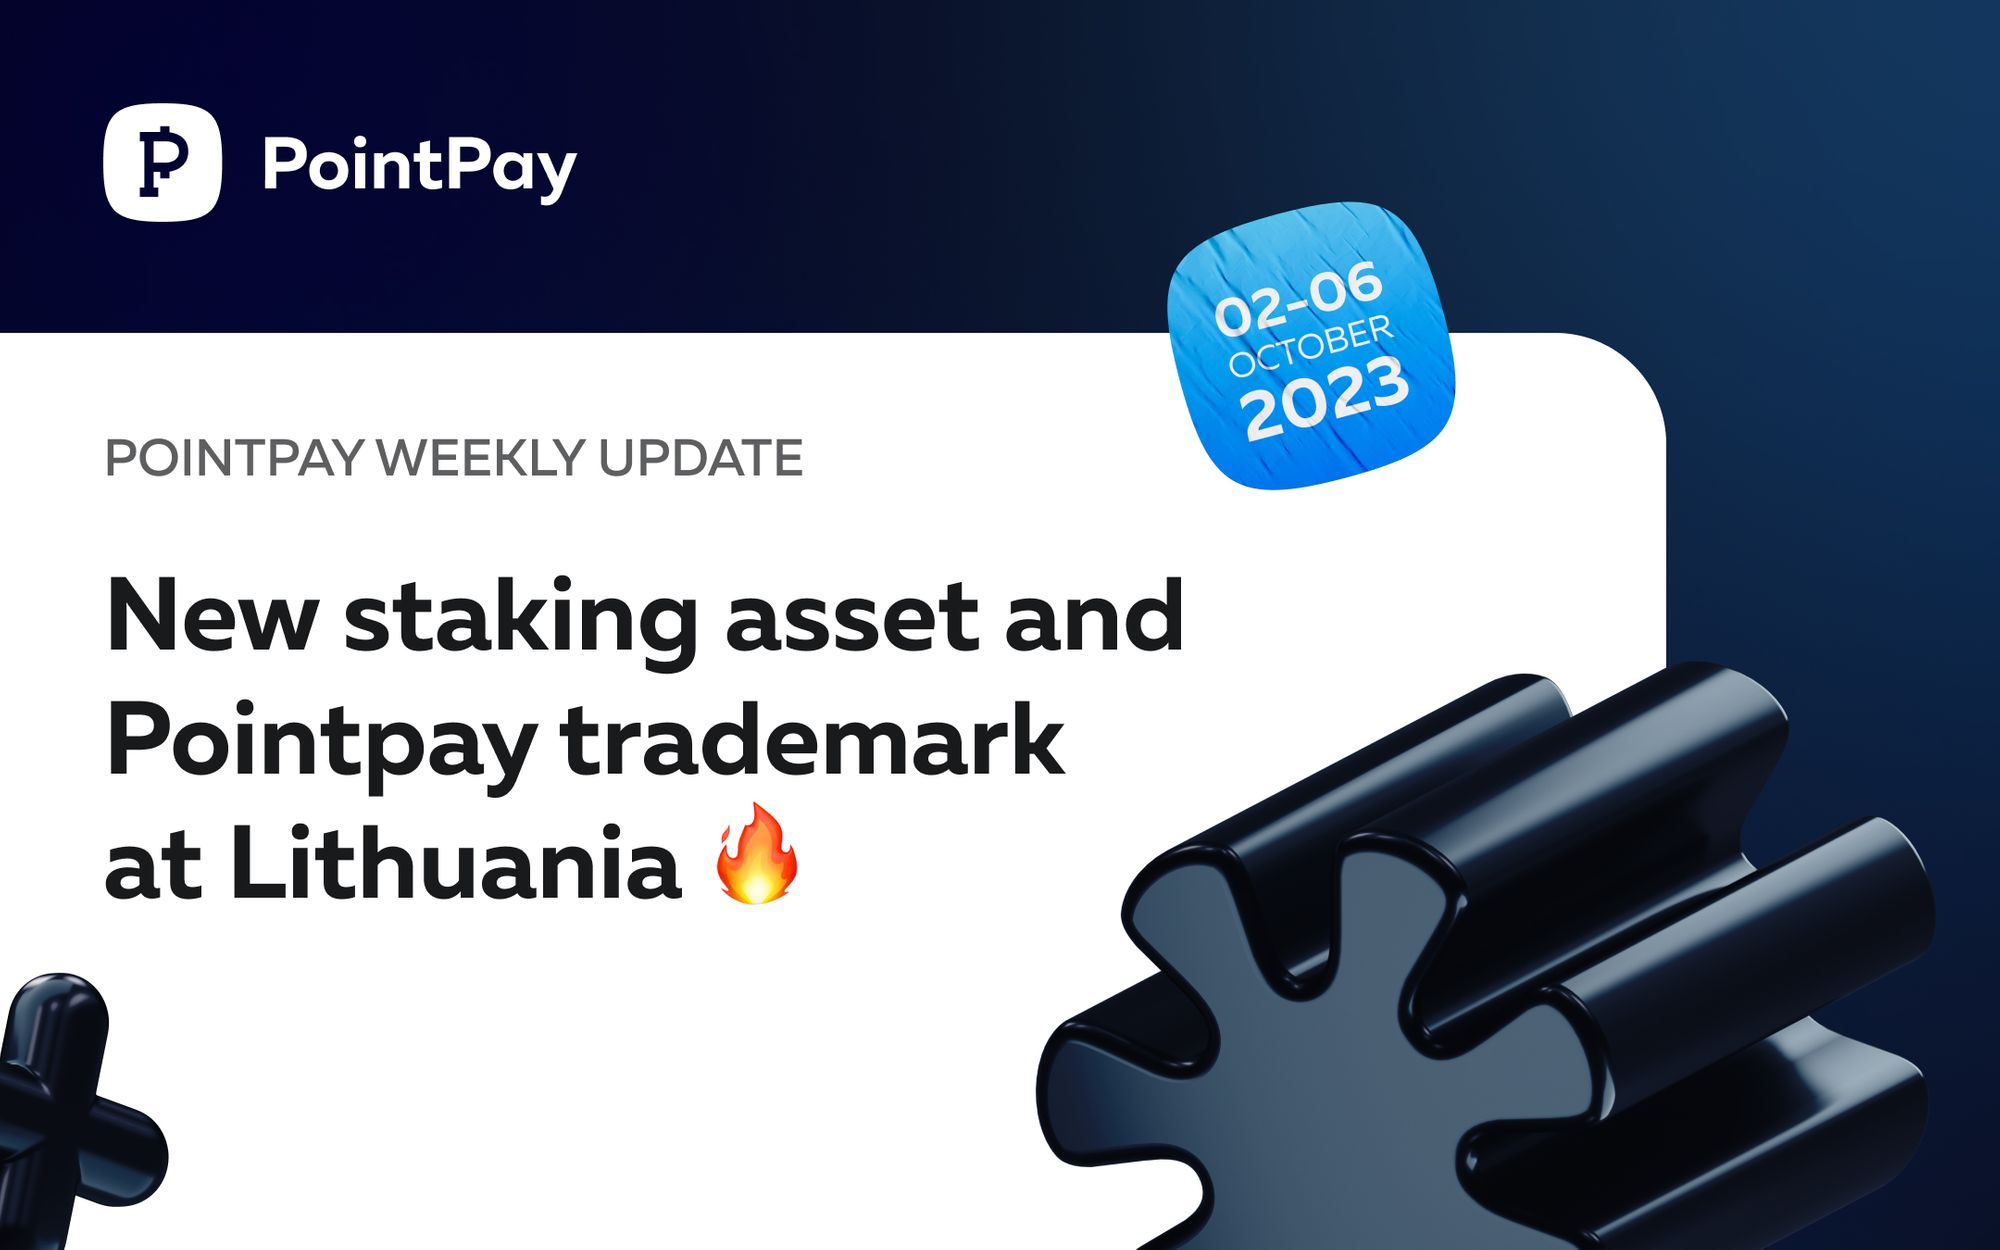 PointPay Weekly Update (2 - 6 October 2023)